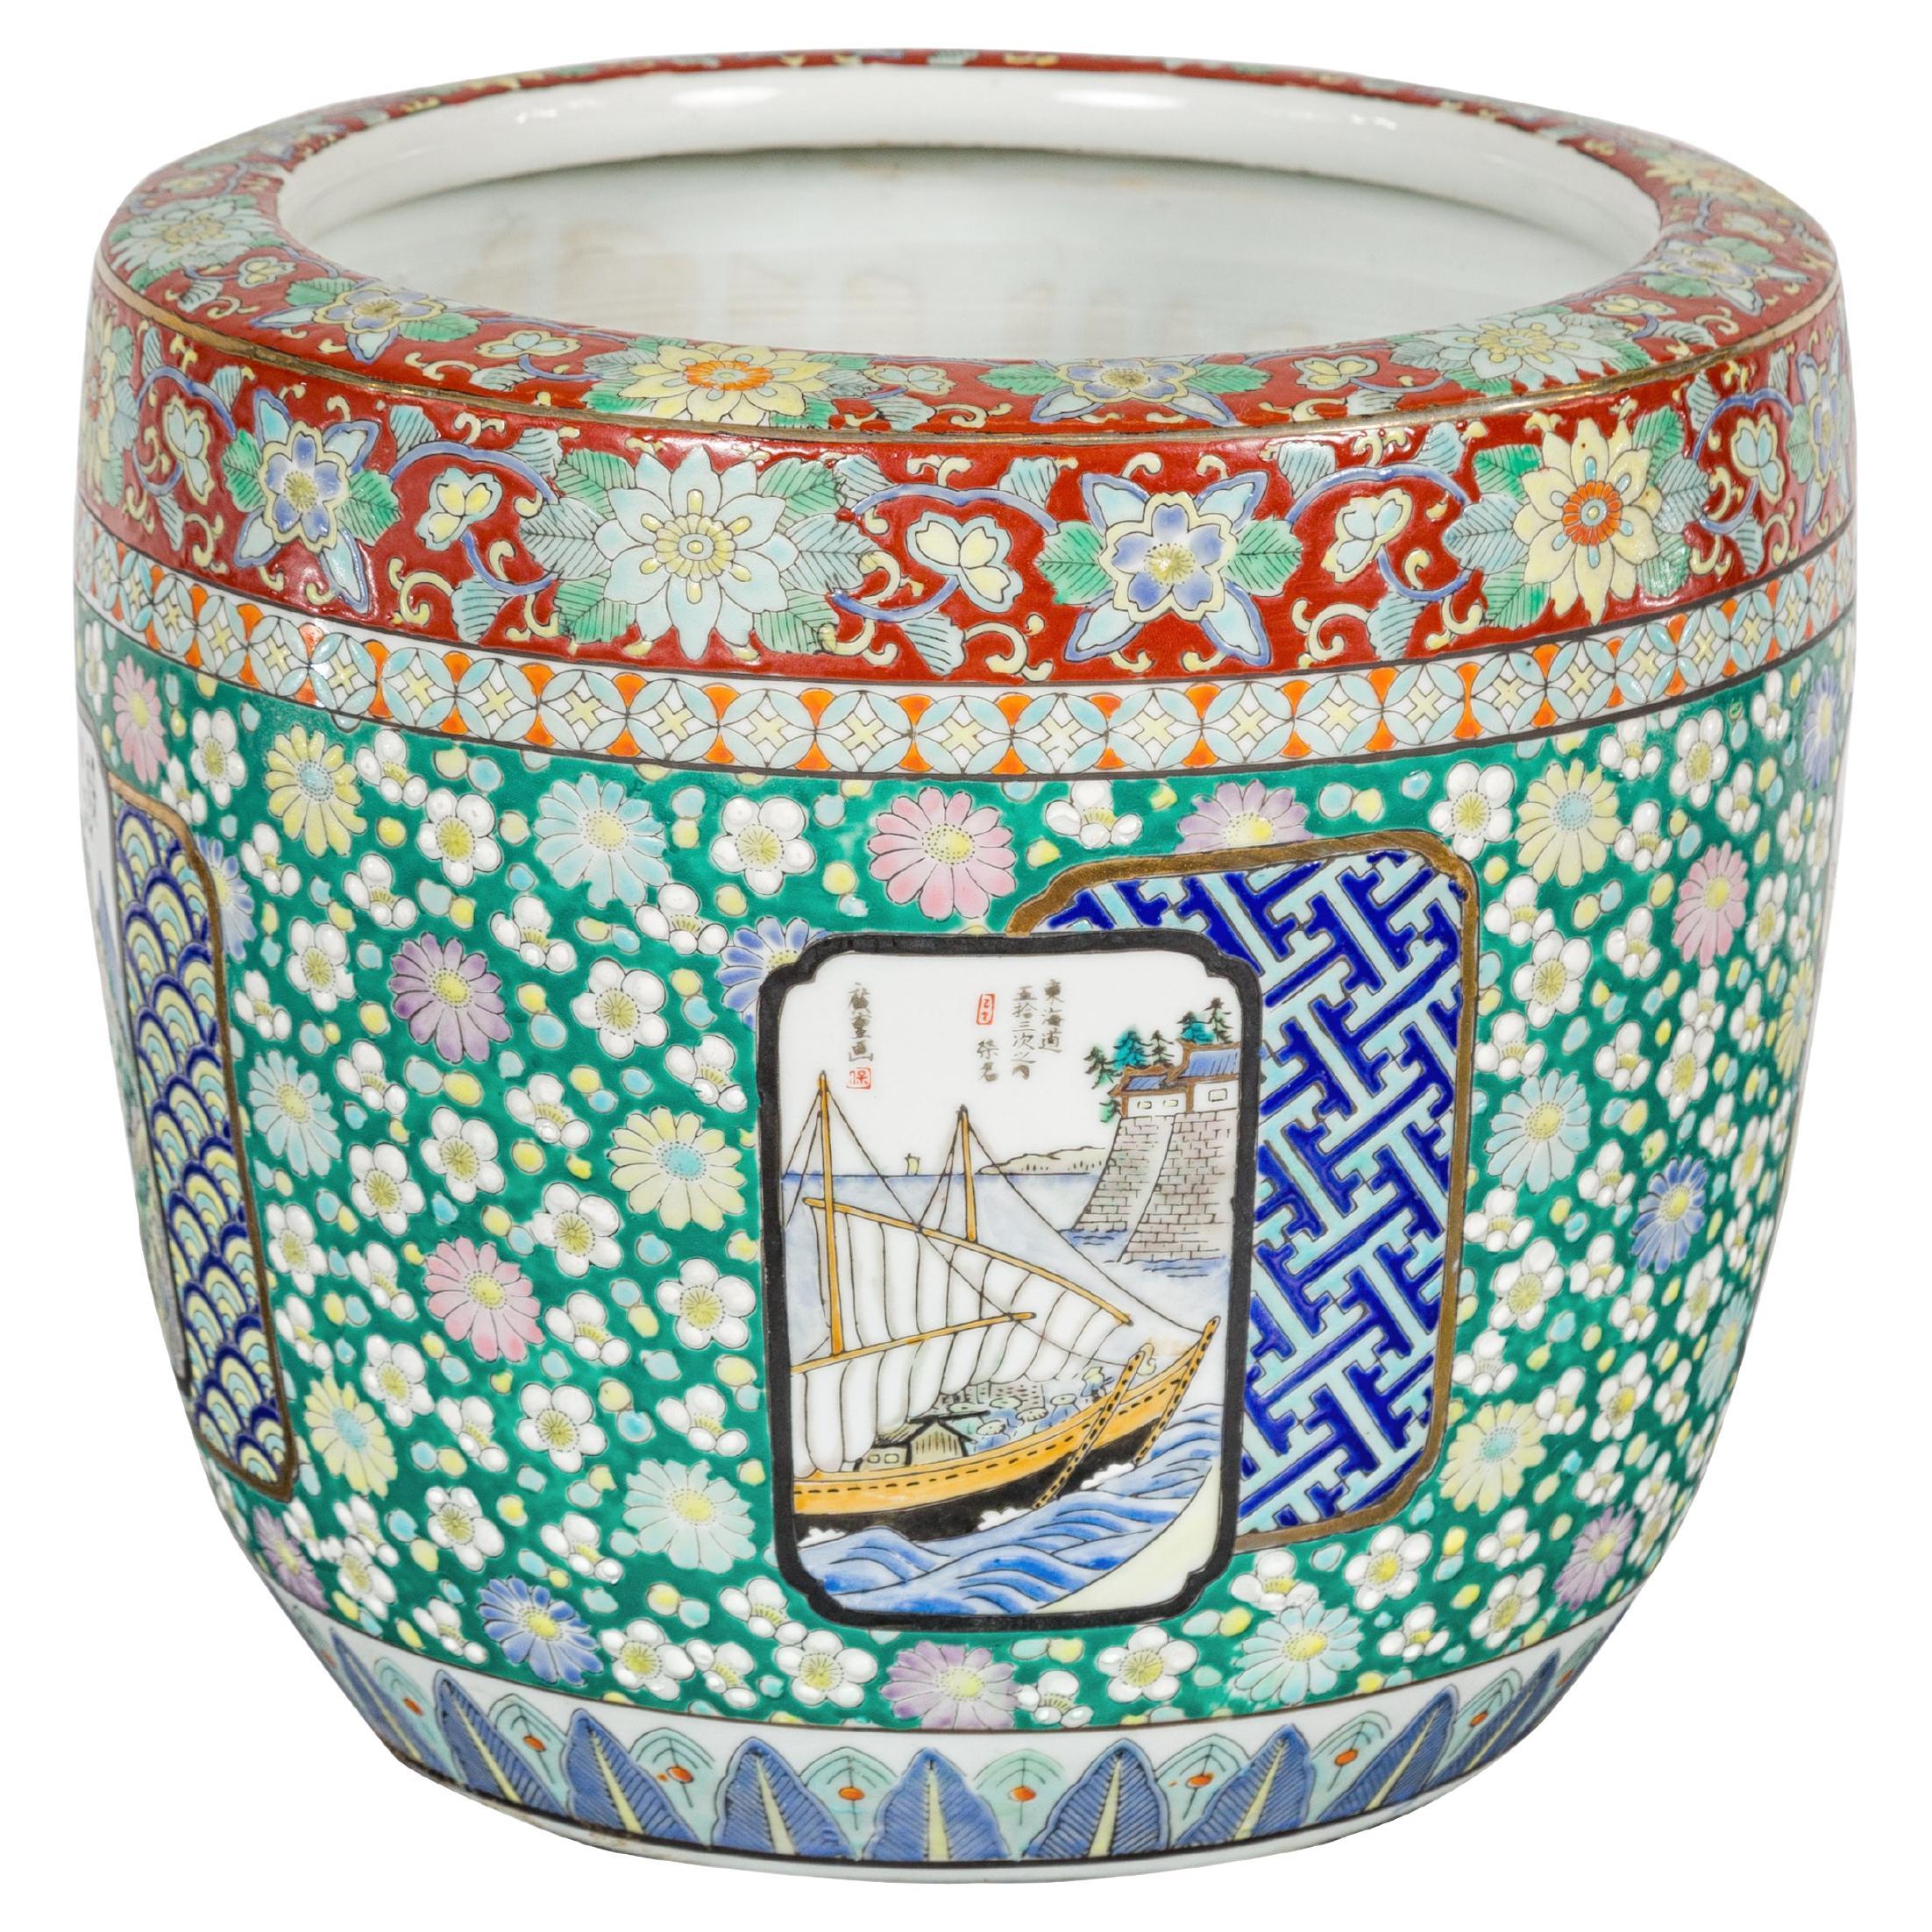 Japanese Hand-Painted Imari Planter with Boat, Mountains, People and Flowers